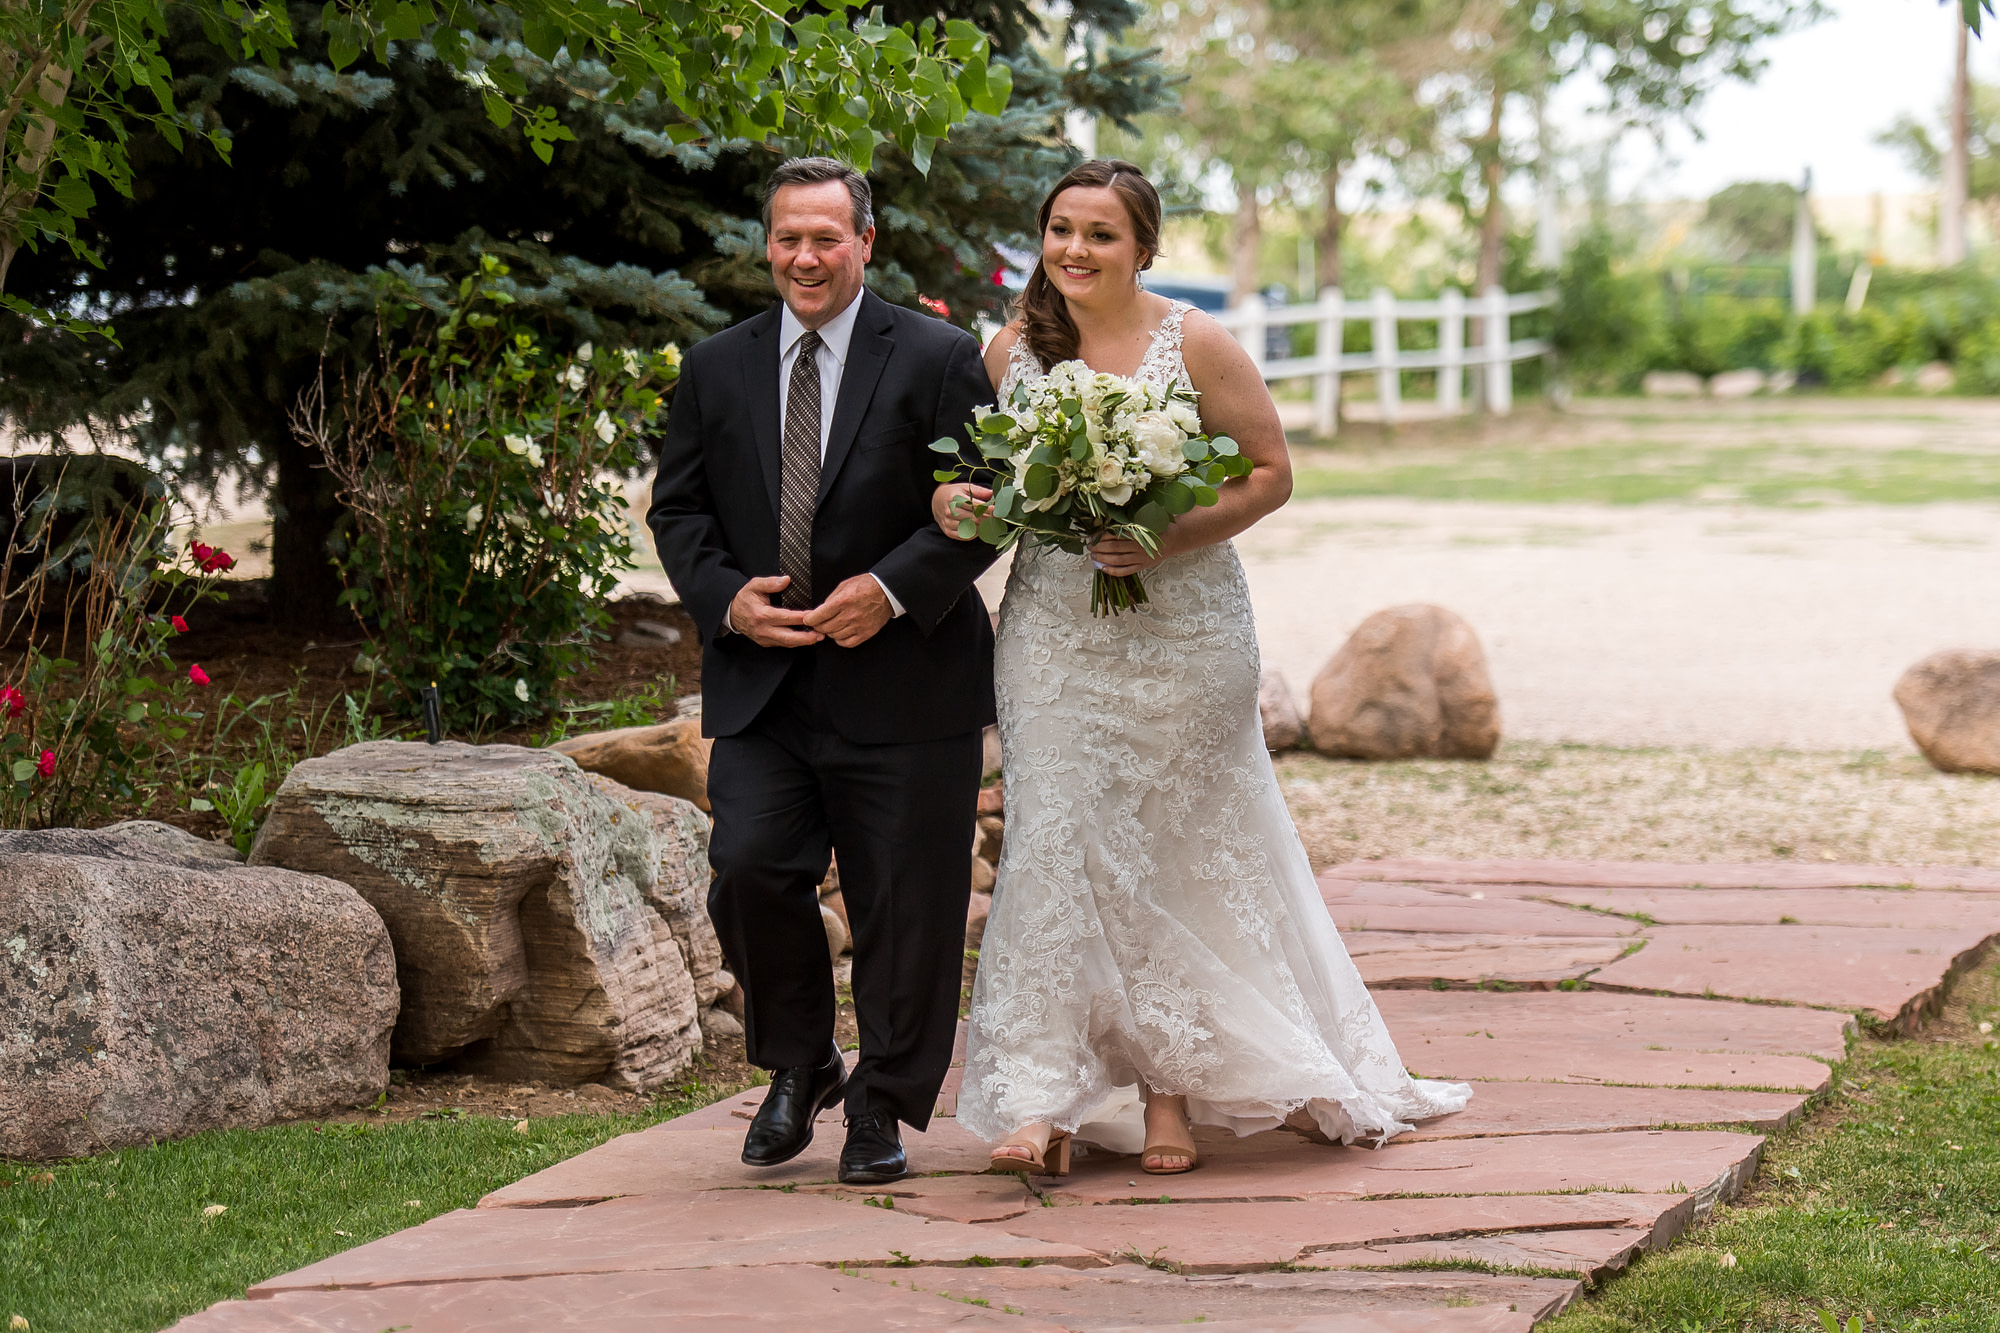 The bride walks down the aisle with her father during a Greenbriar Inn wedding in Boulder, Colorado.